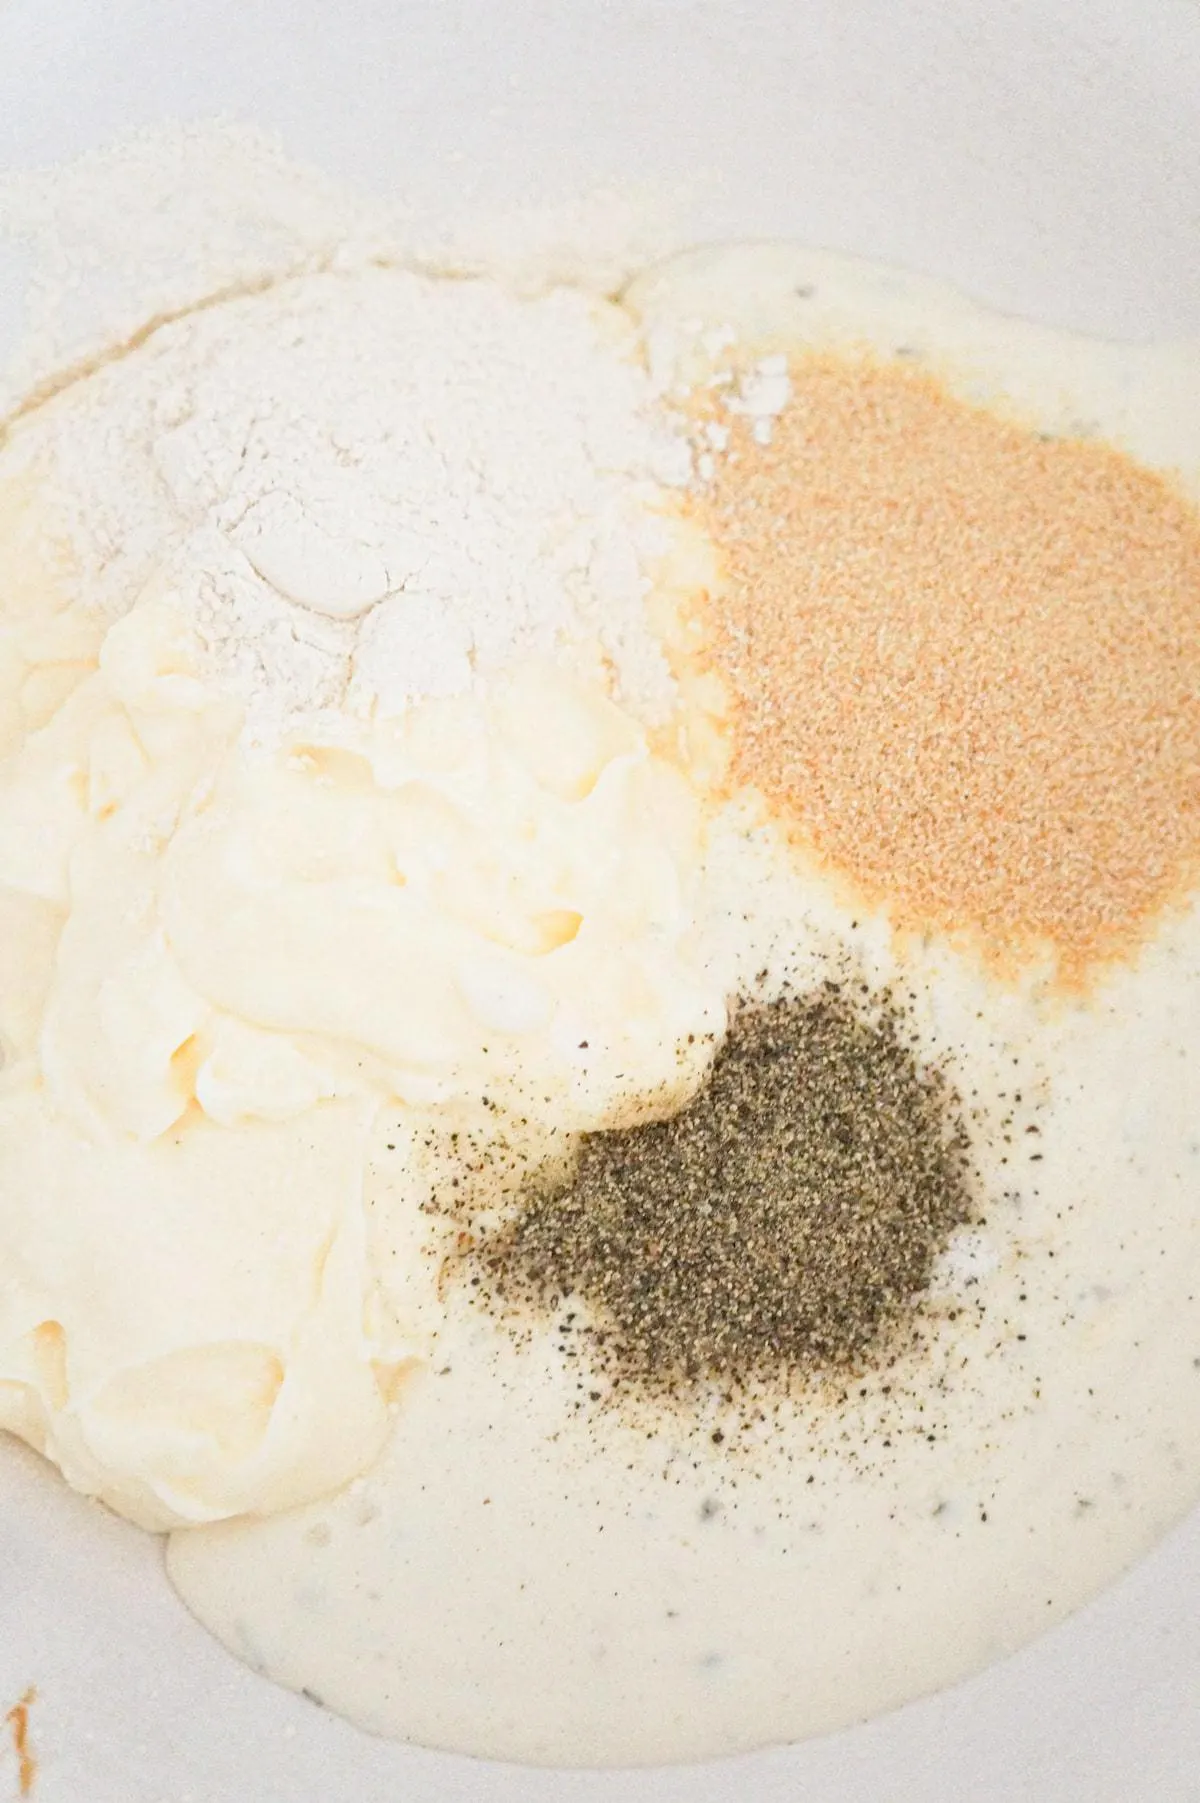 spices on top of ranch dressing and mayo in a mixing bowl